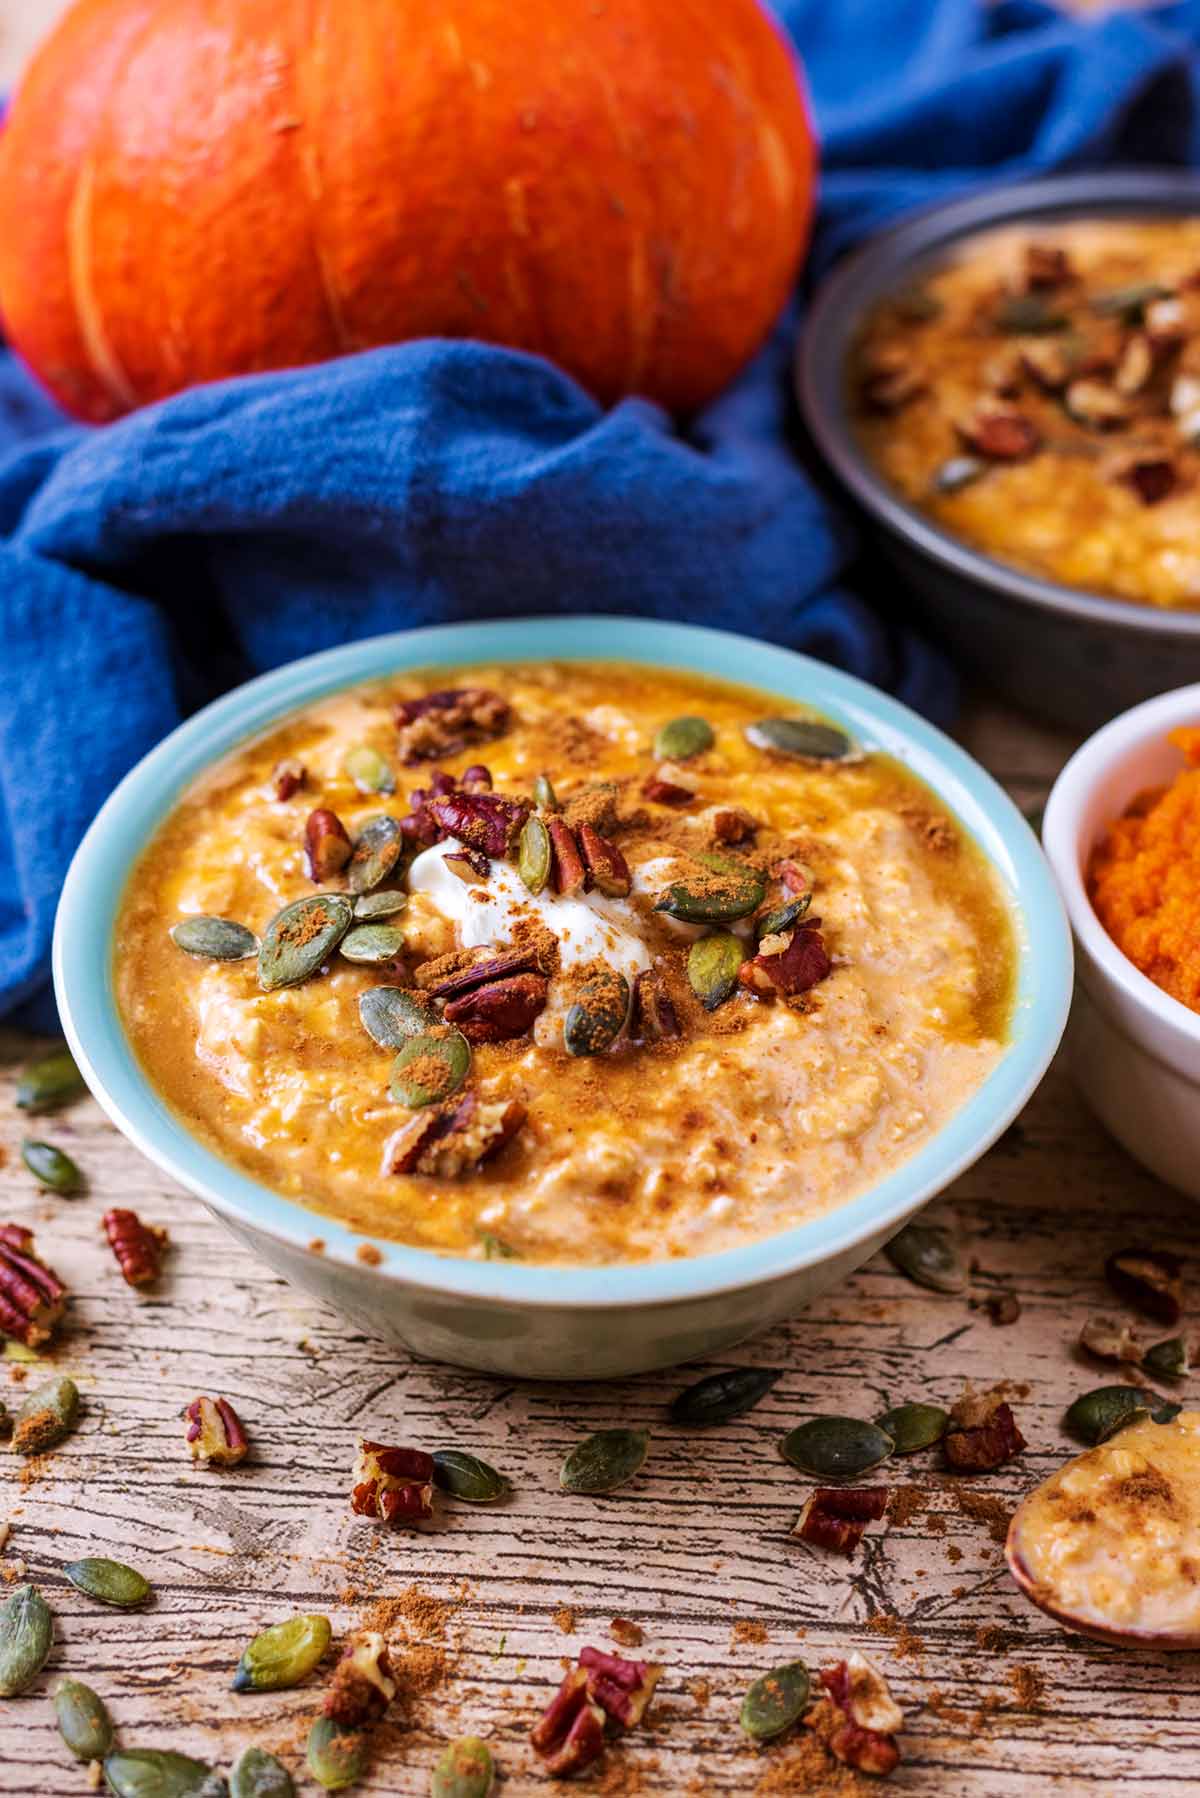 Overnight oats in a bowl with a whole pumpkin in the background.